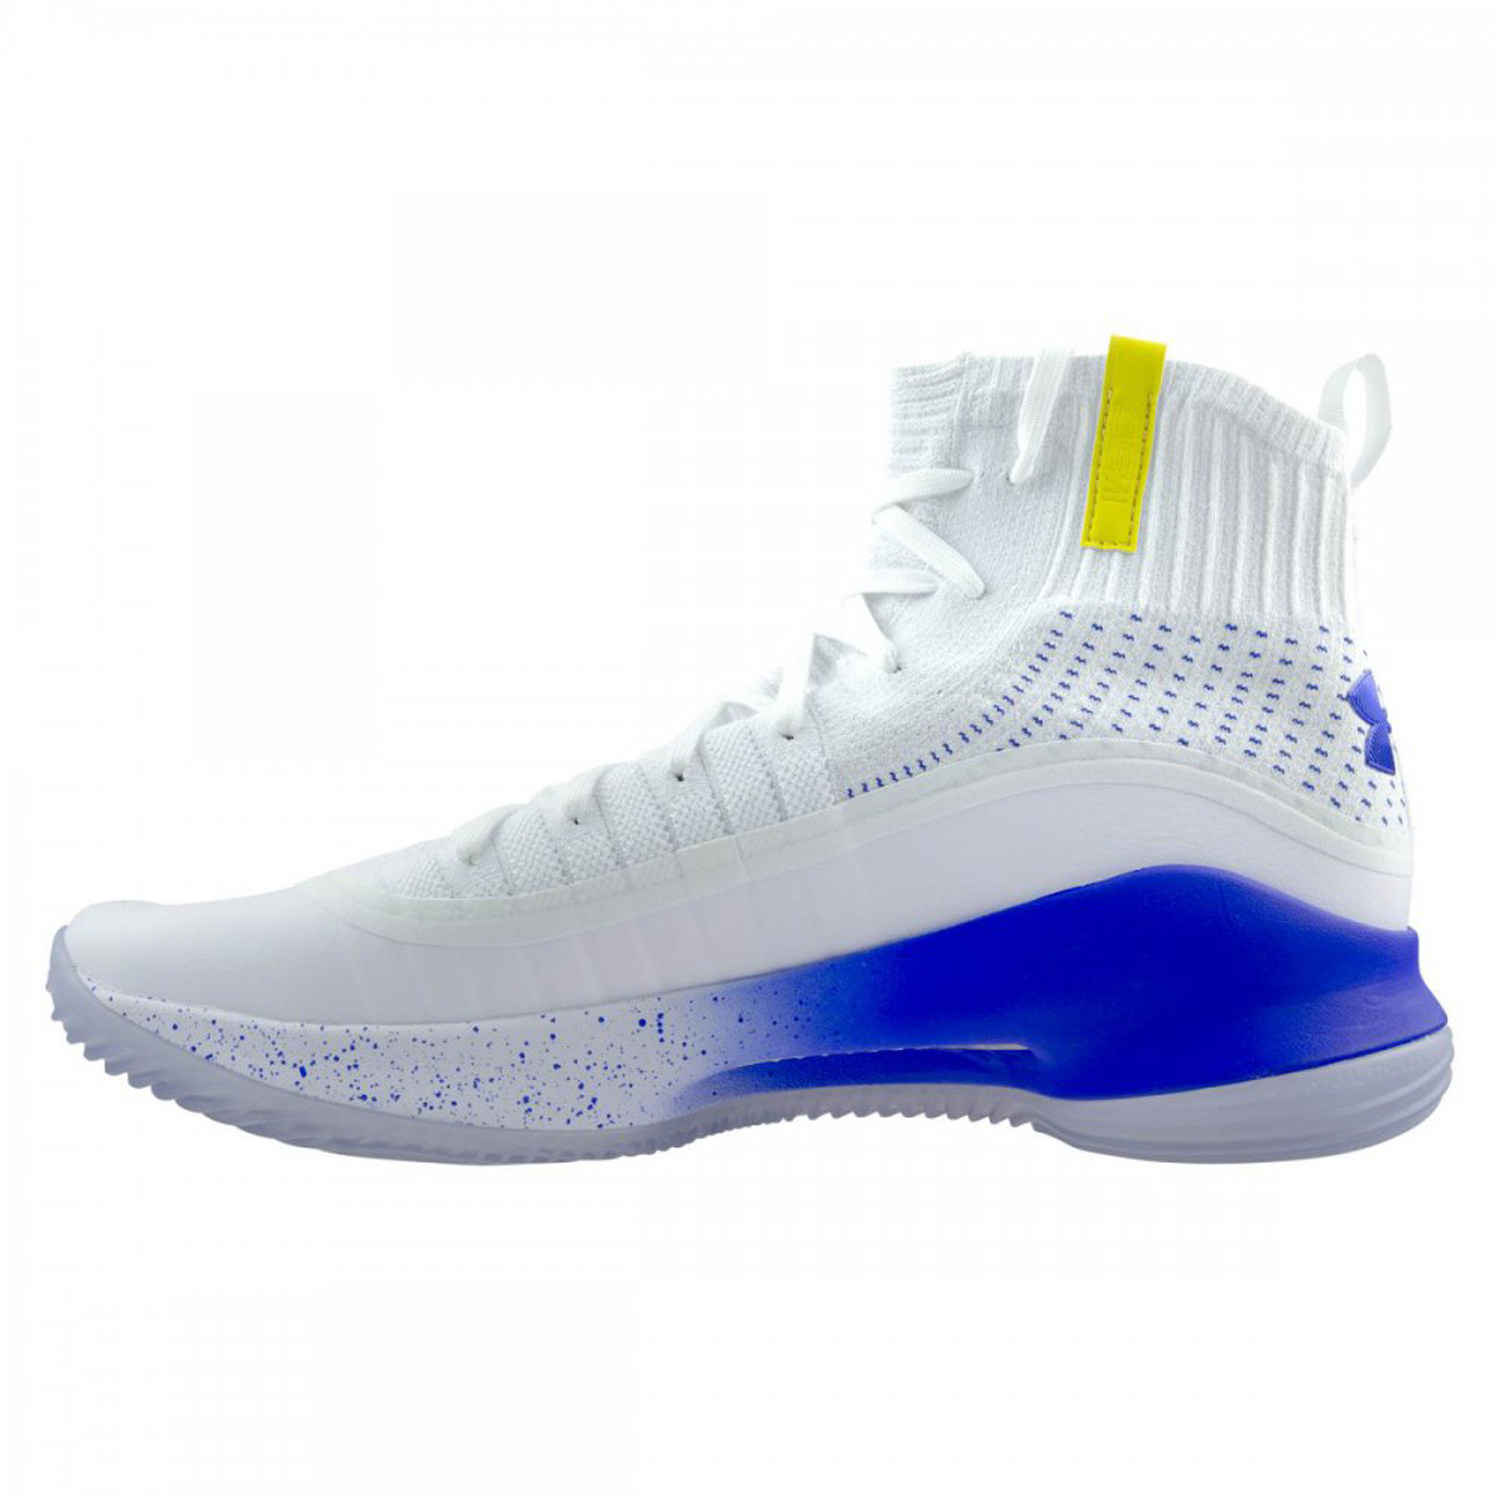 The Under Armour Curry 4 'Home' Has Launched Overseas - WearTesters